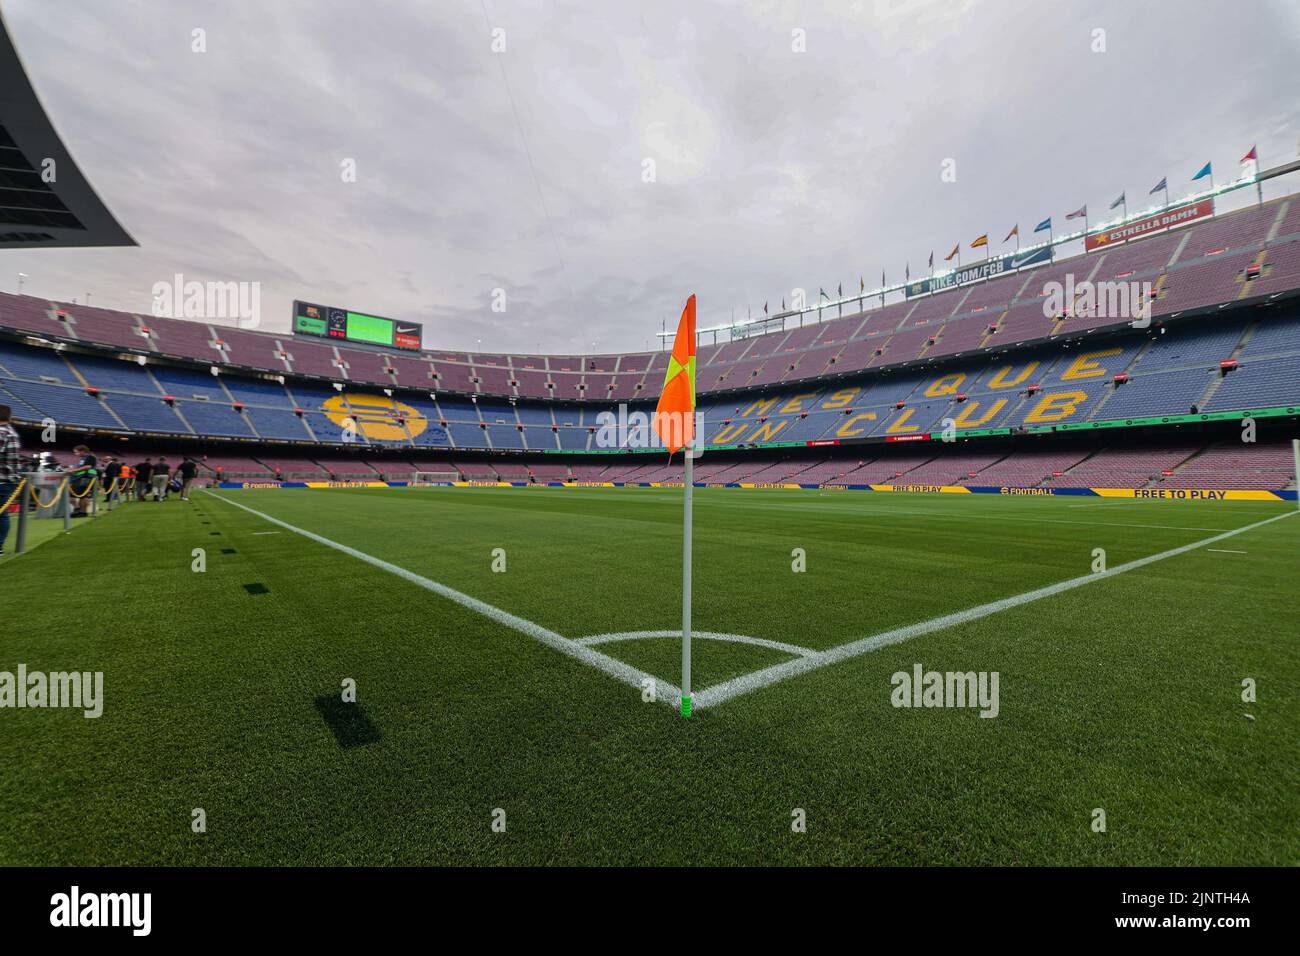 Stadium during the Liga match between FC Barcelona and Rayo Vallecano at Spotify Camp Nou in Barcelona, Spain. Stock Photo